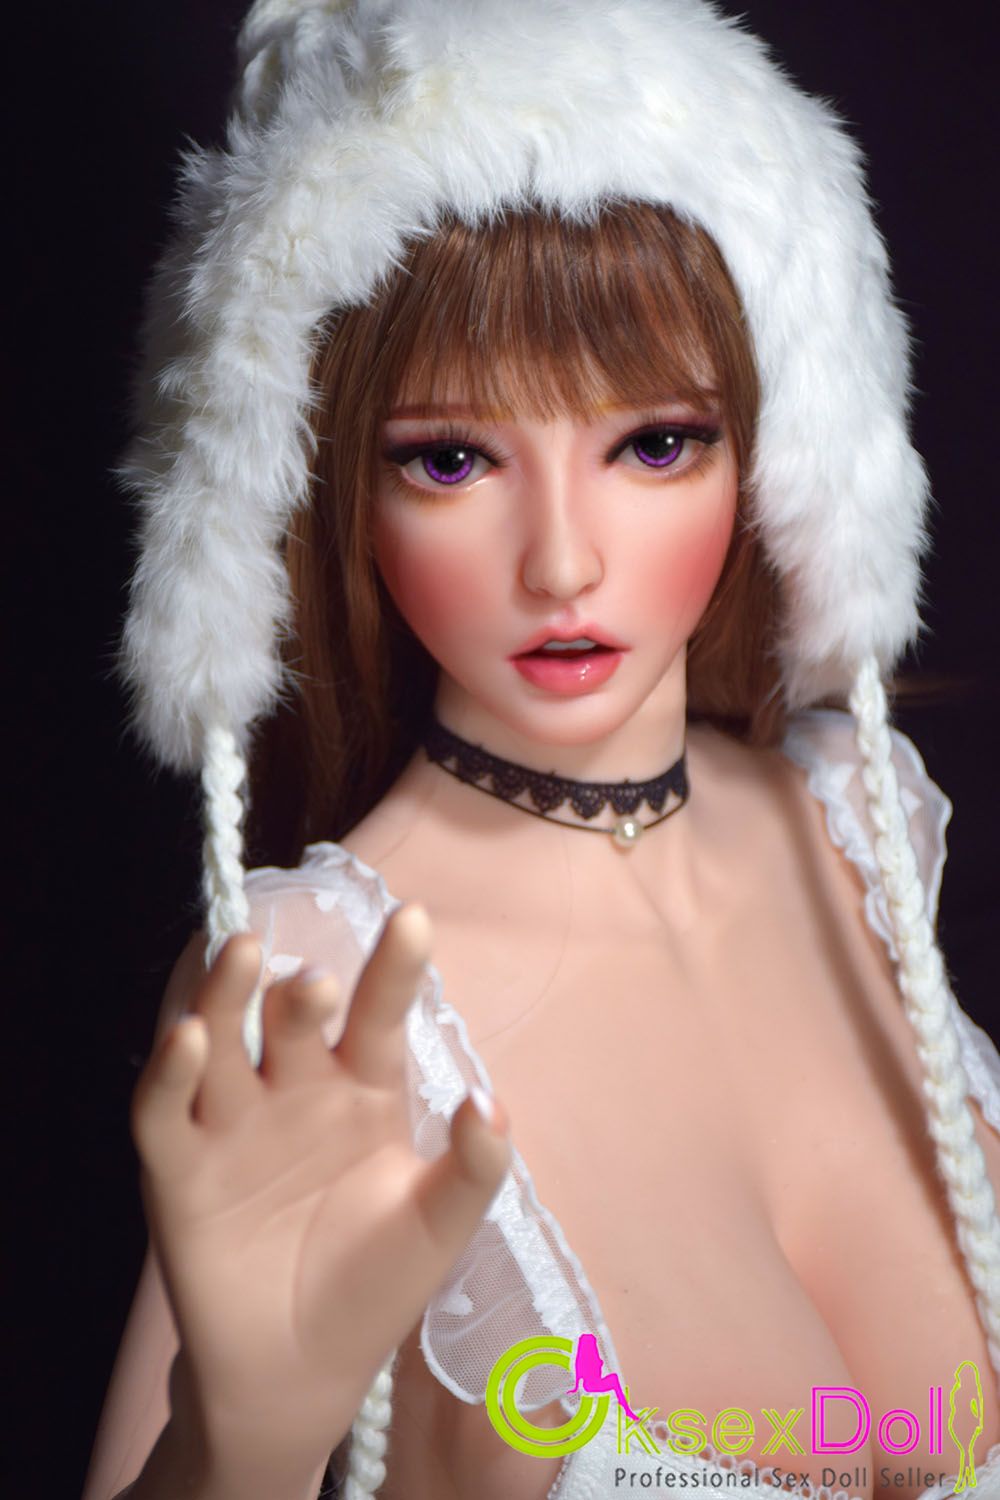 Giant Breast Doll images